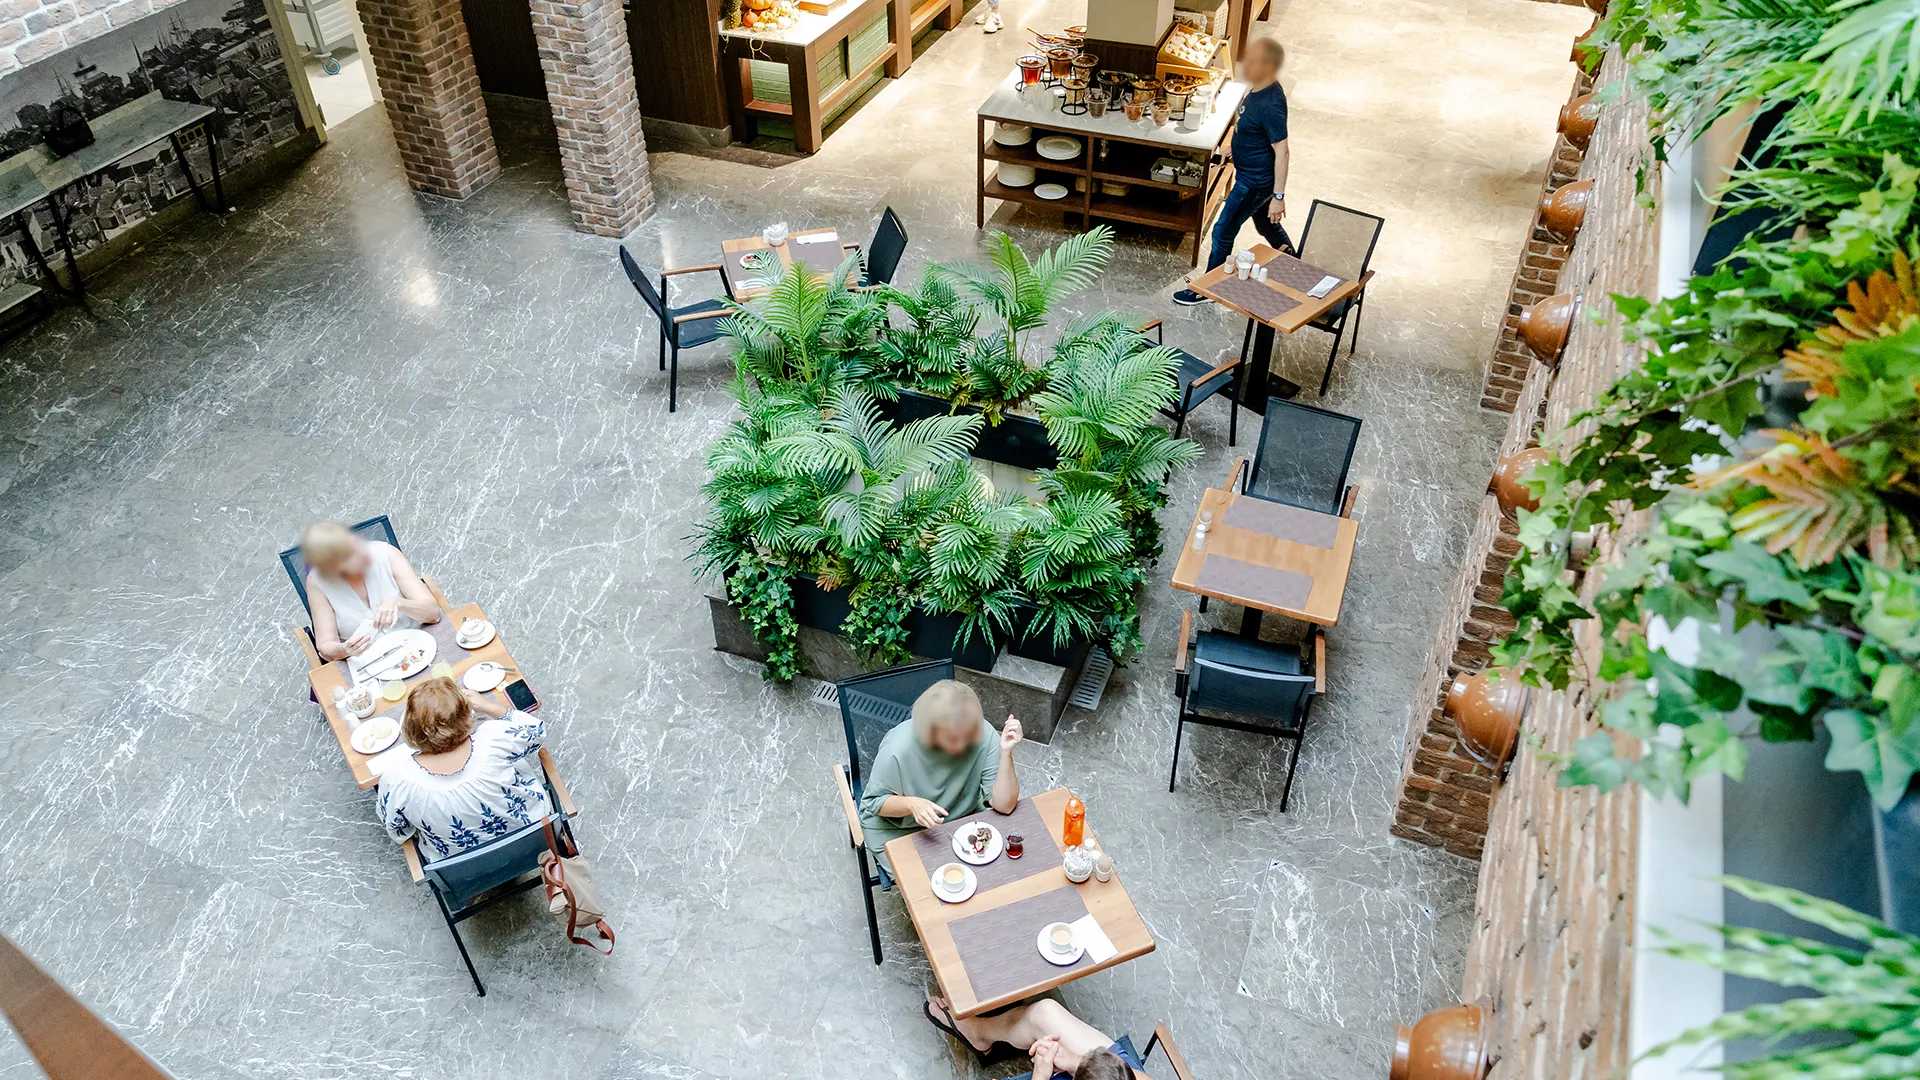 An aerial view of people eating at tables in a hotel restaurant.